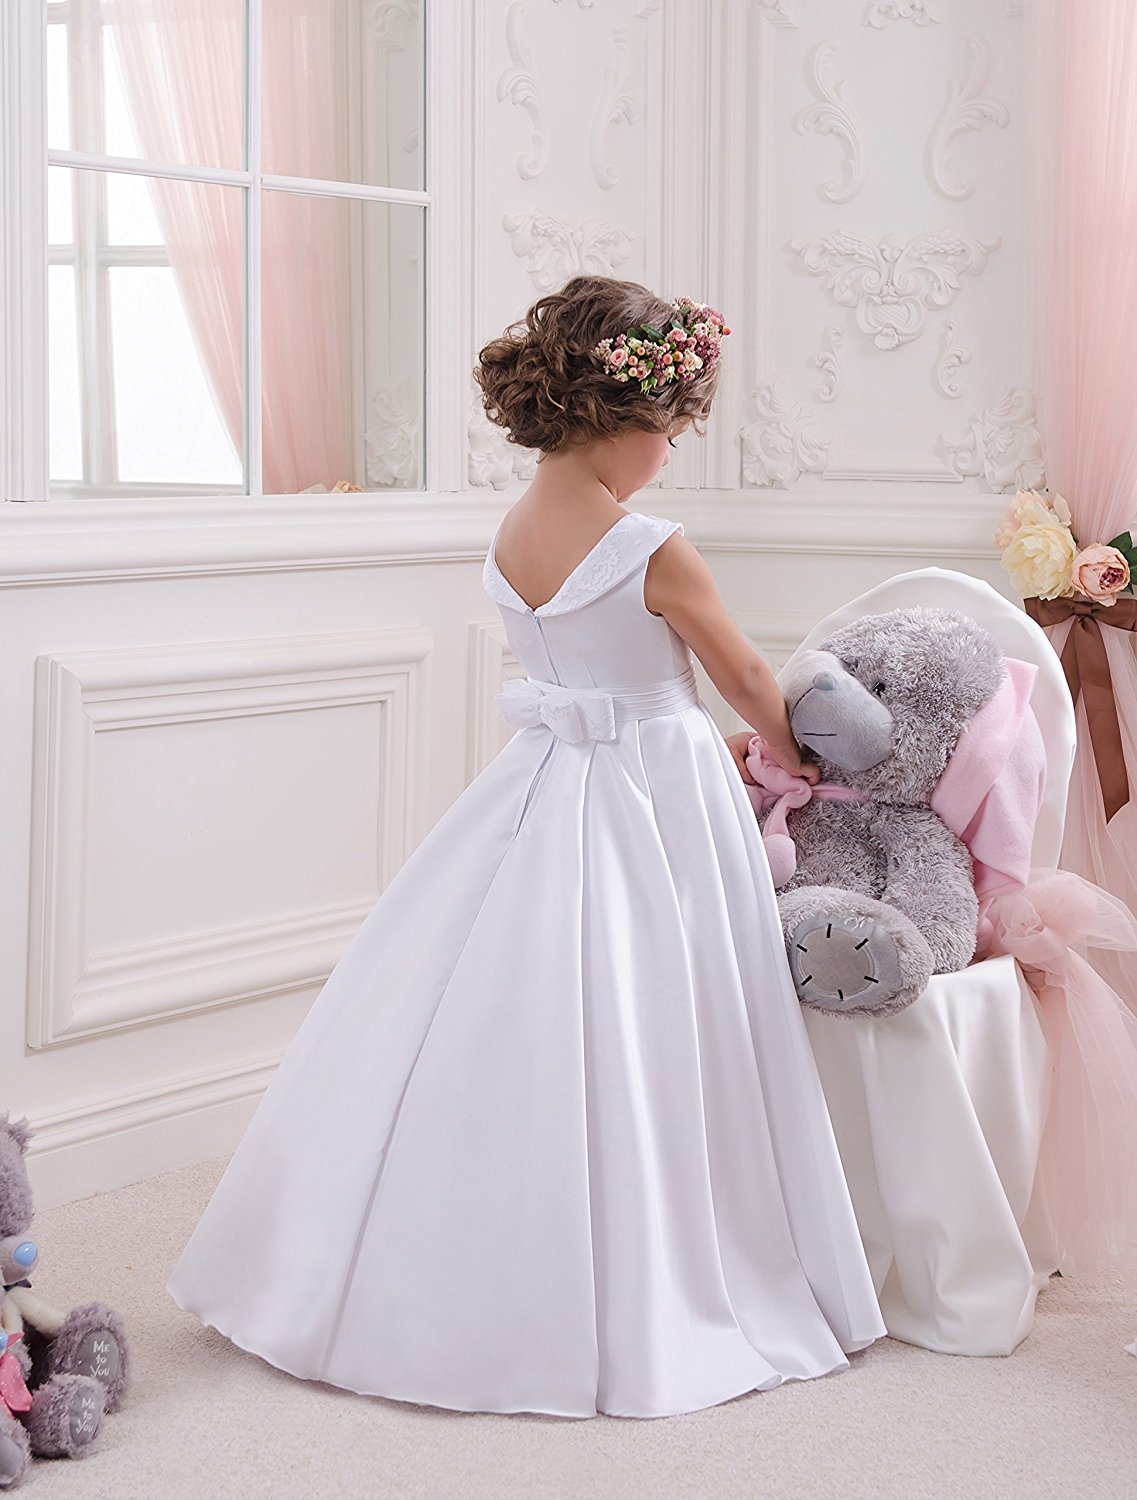 Beautify Your Children with Smart and Stylish Designer Wedding Dresses